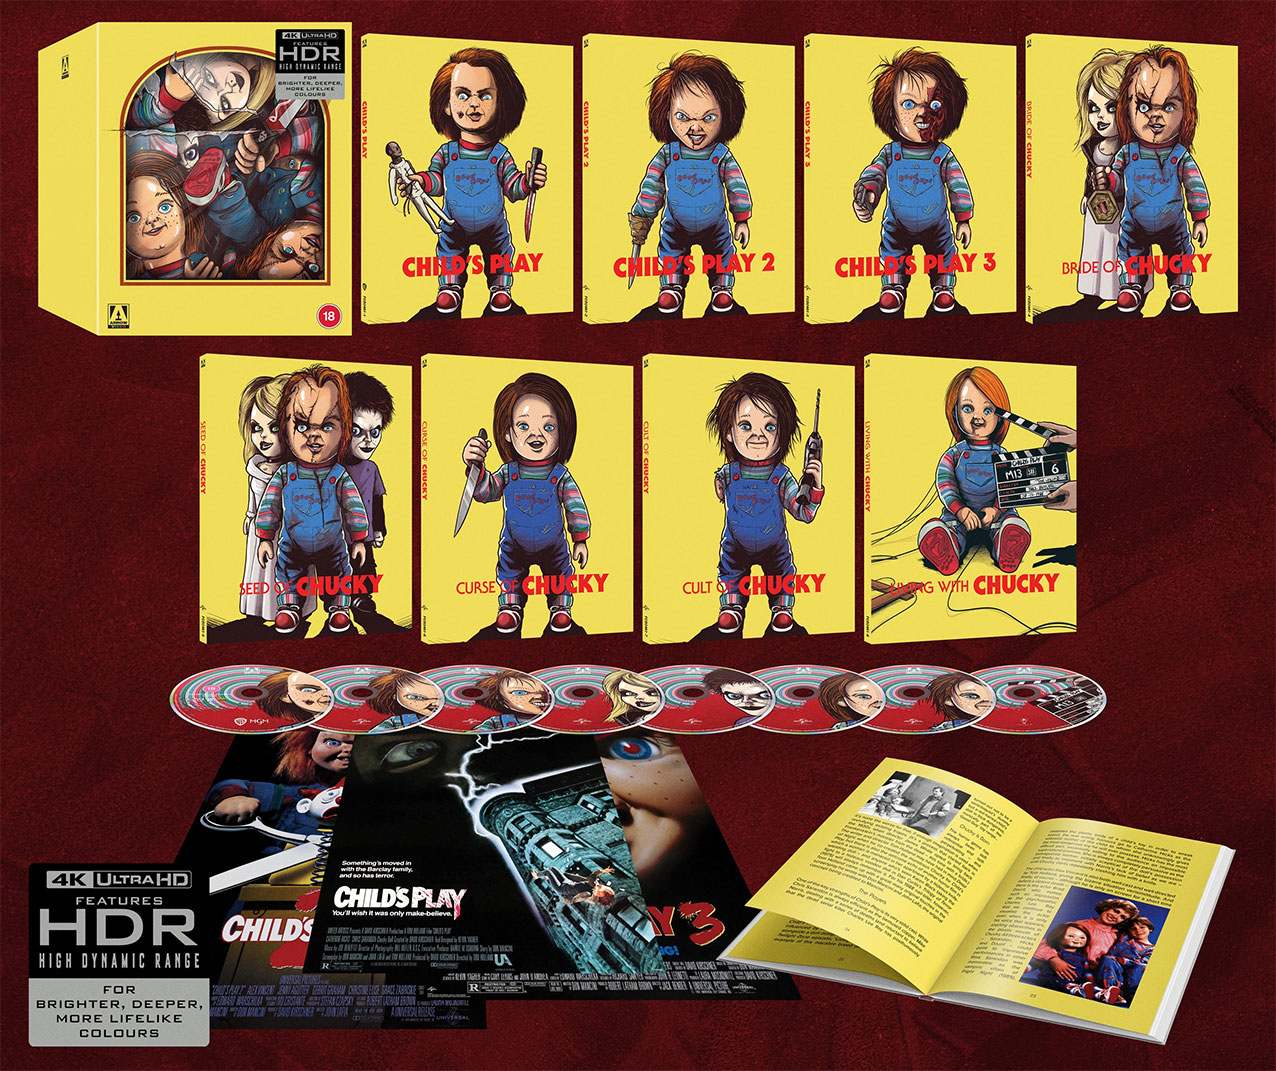 Child's Play 1-3, Bride, Seed, Curse, Cult of Chucky, Living With Chucky 4K UHD + Blu-ray Limited Edition Collection pack shot